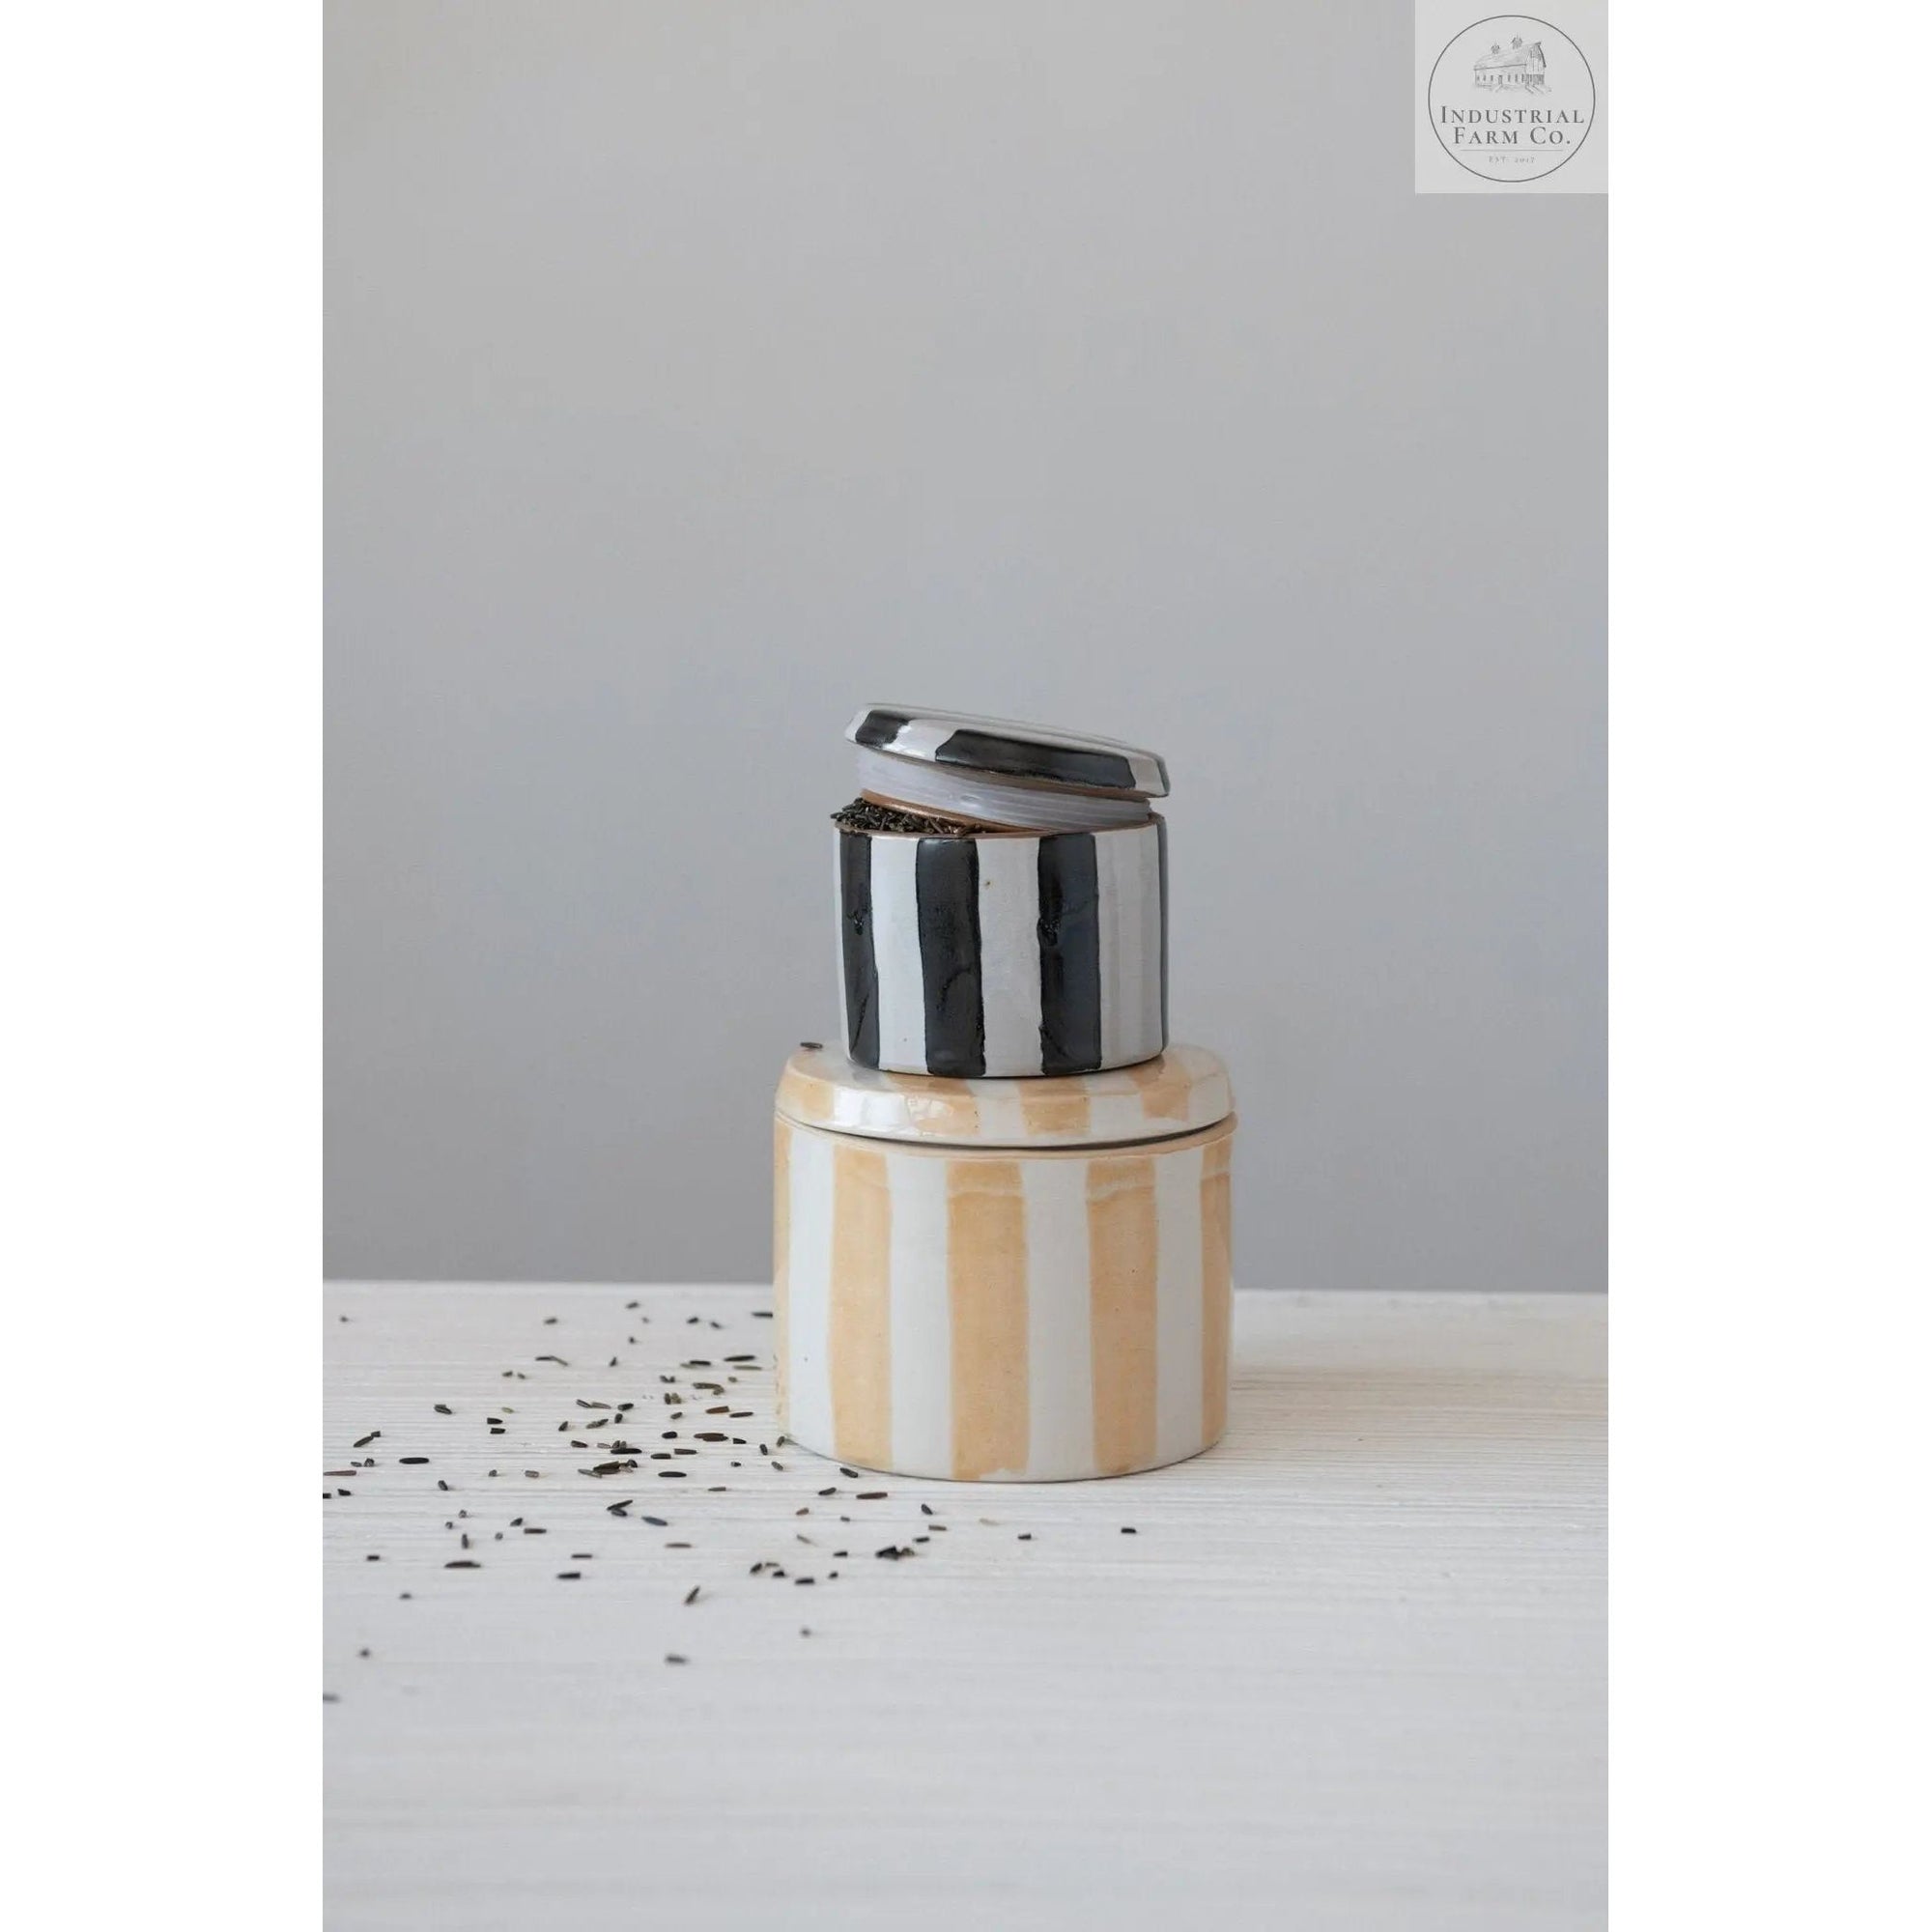 Striped Stoneware Canister  Black Stripes   | Industrial Farm Co